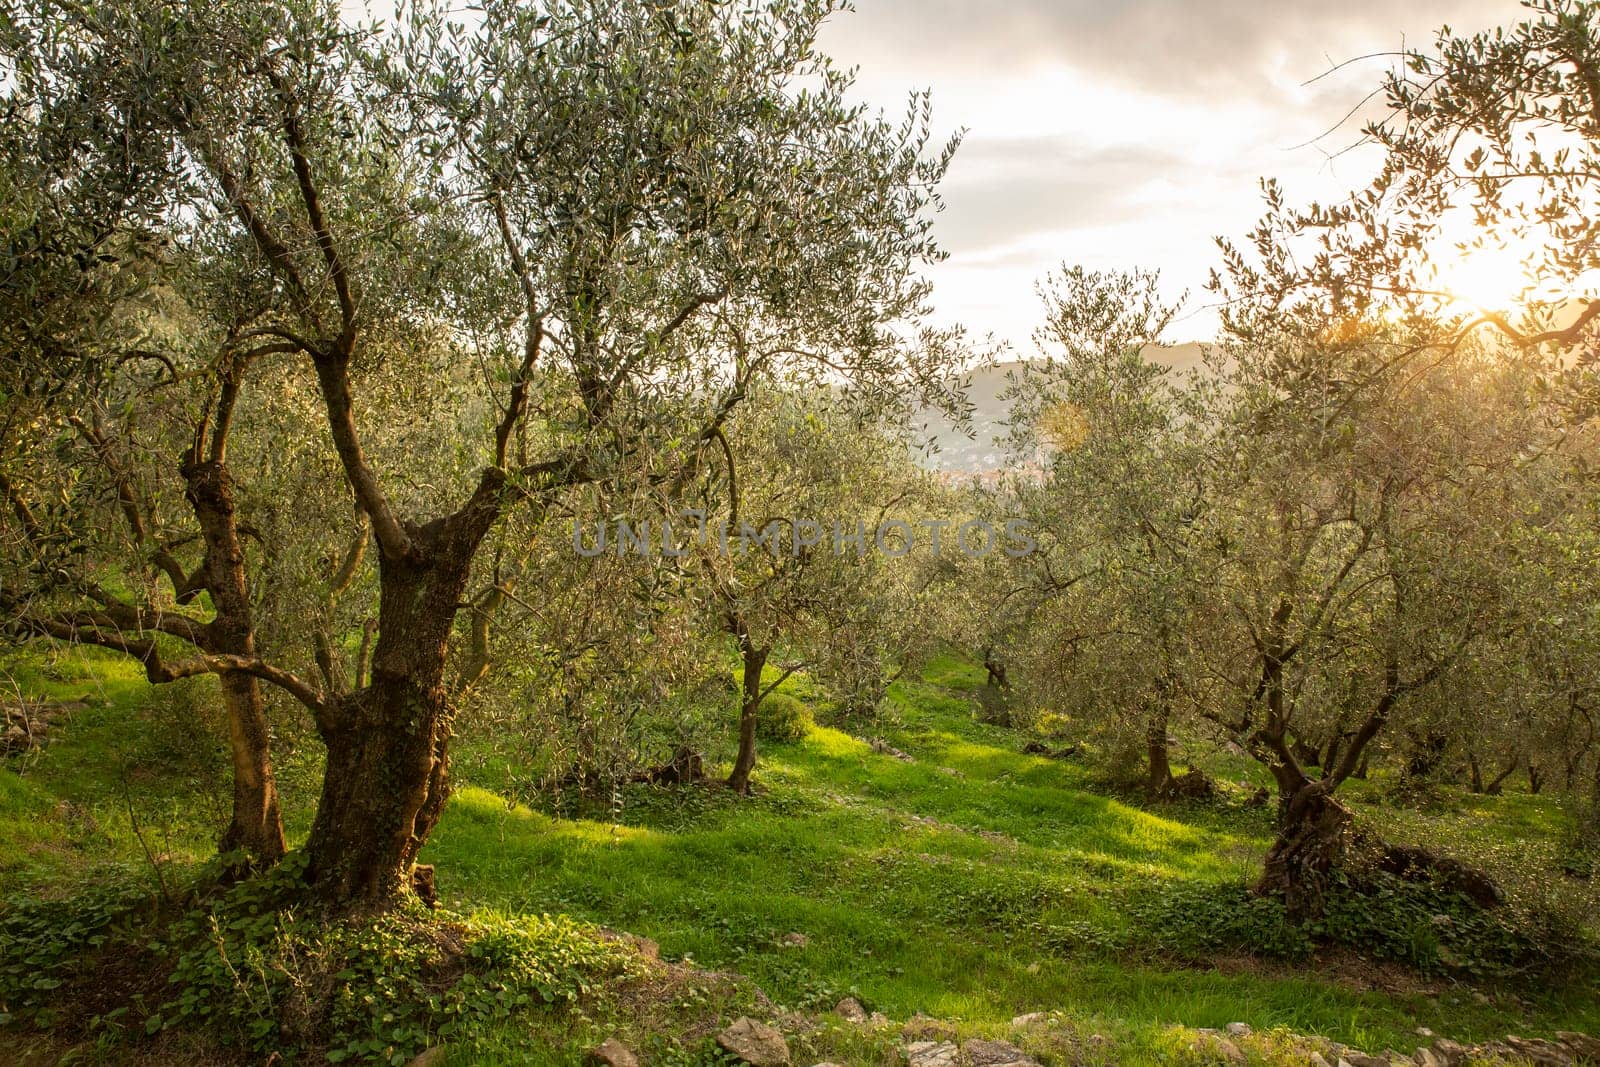 The Ligurian olive trees that are used to make extra virgin olive oil by contas